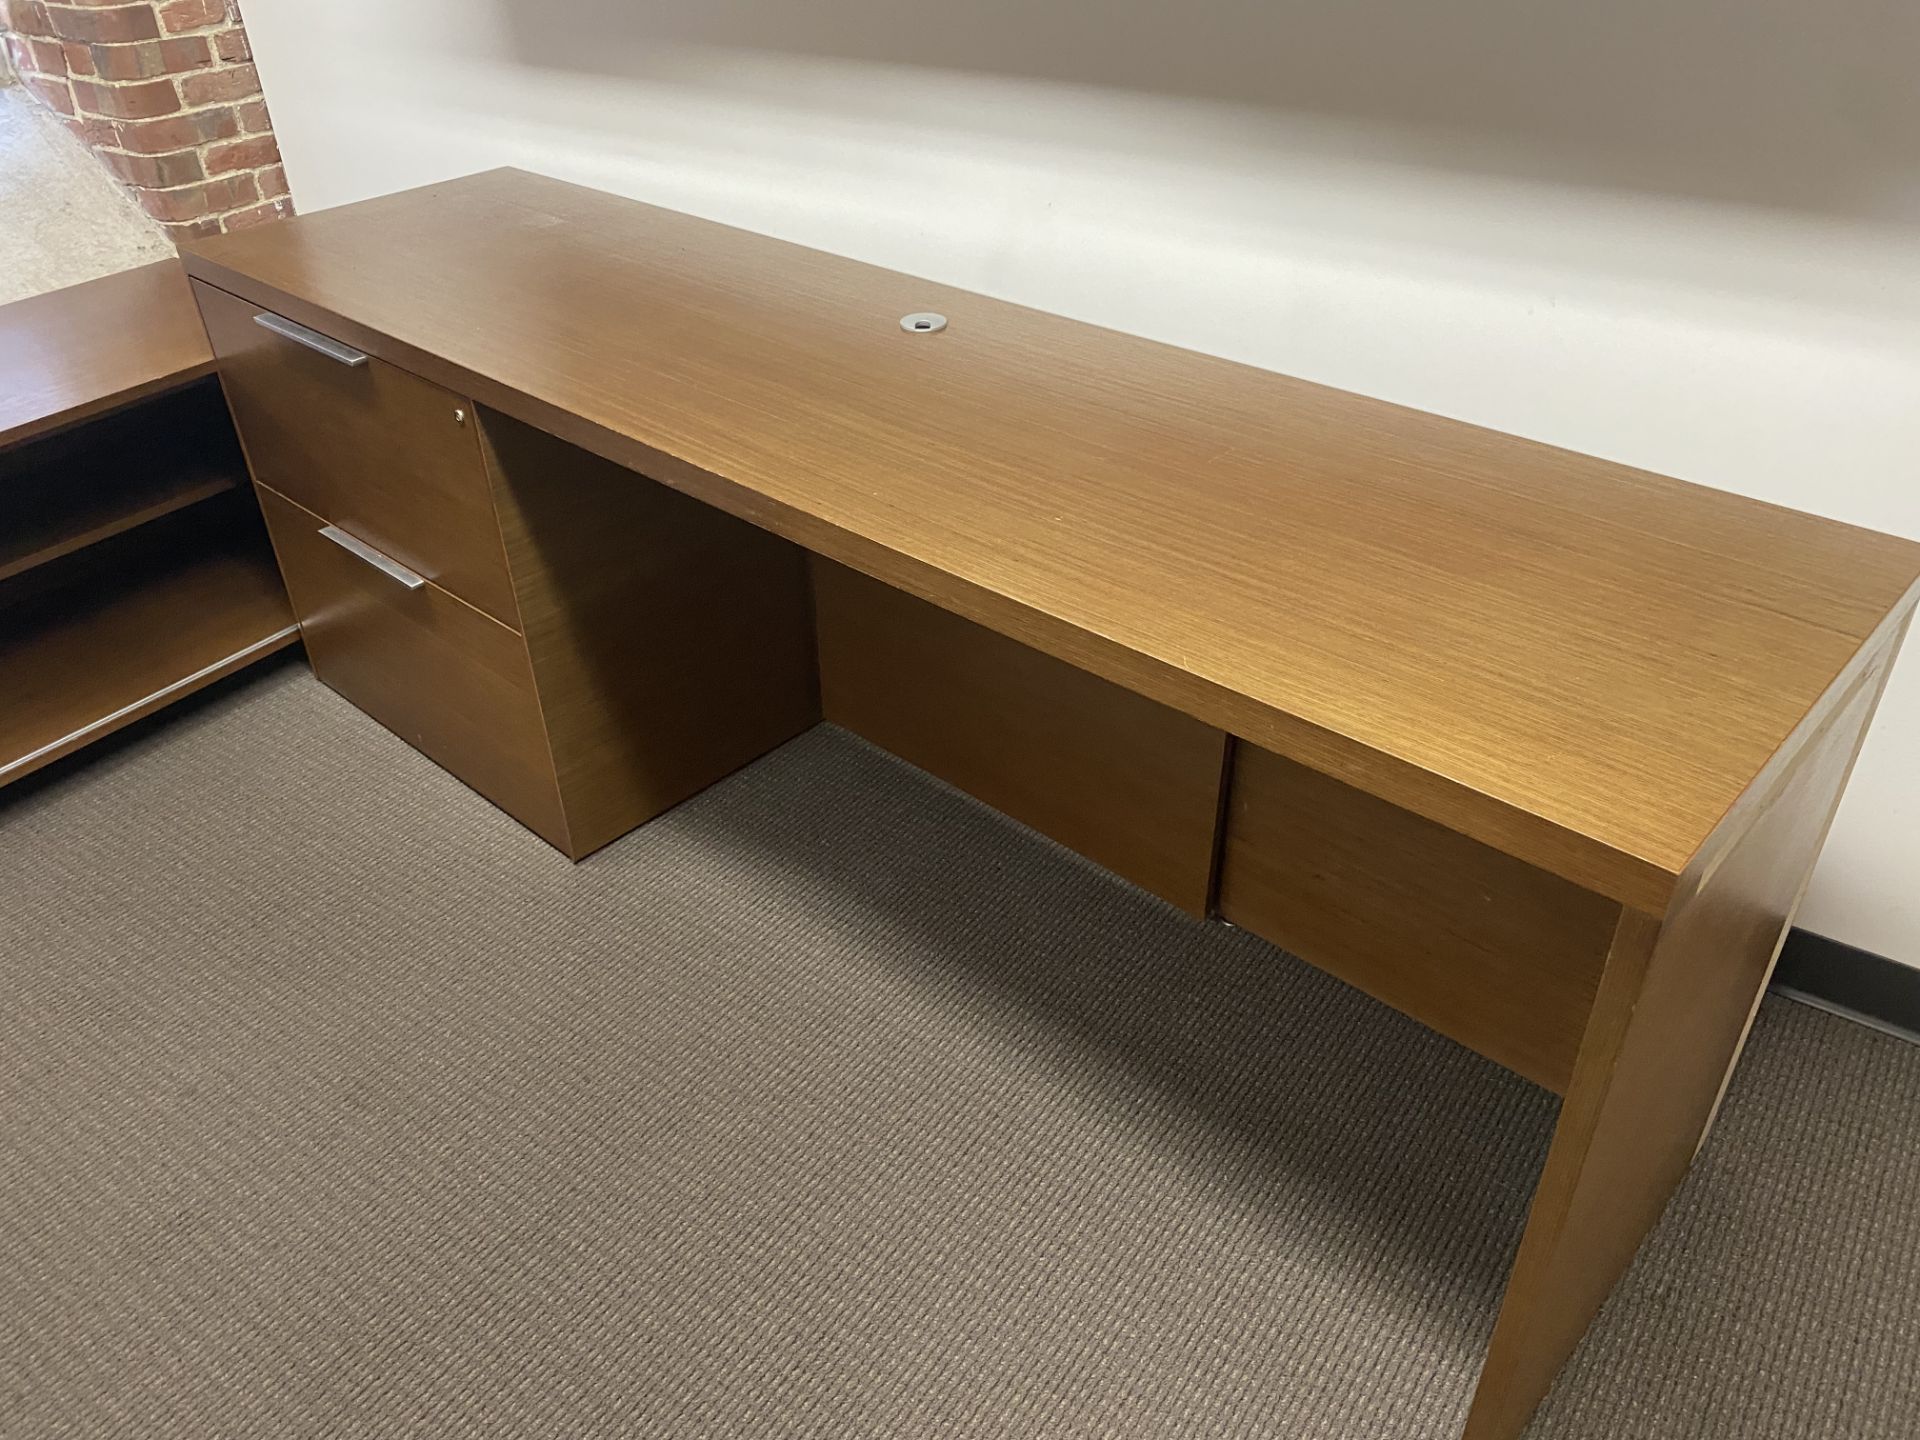 {LOT} 3' x 6' Ergonomic Electric Height Adjustable Wood Top Desk (49" Max Height) w/Matching - Image 3 of 4